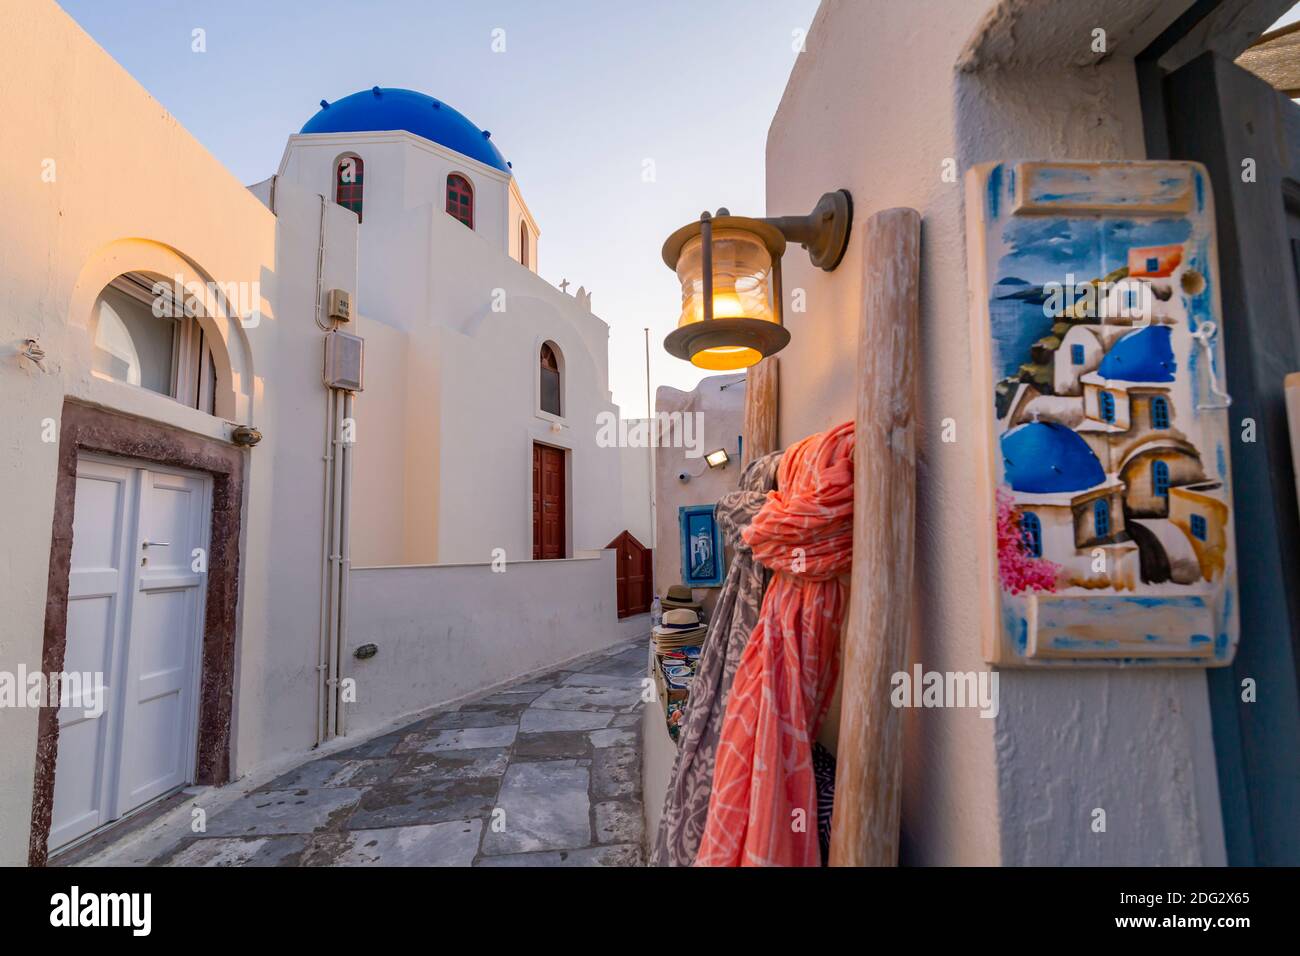 View of church and souvenir painted pictures shop in Oia, Santorini, Greek Islands, Greece, Europe Stock Photo